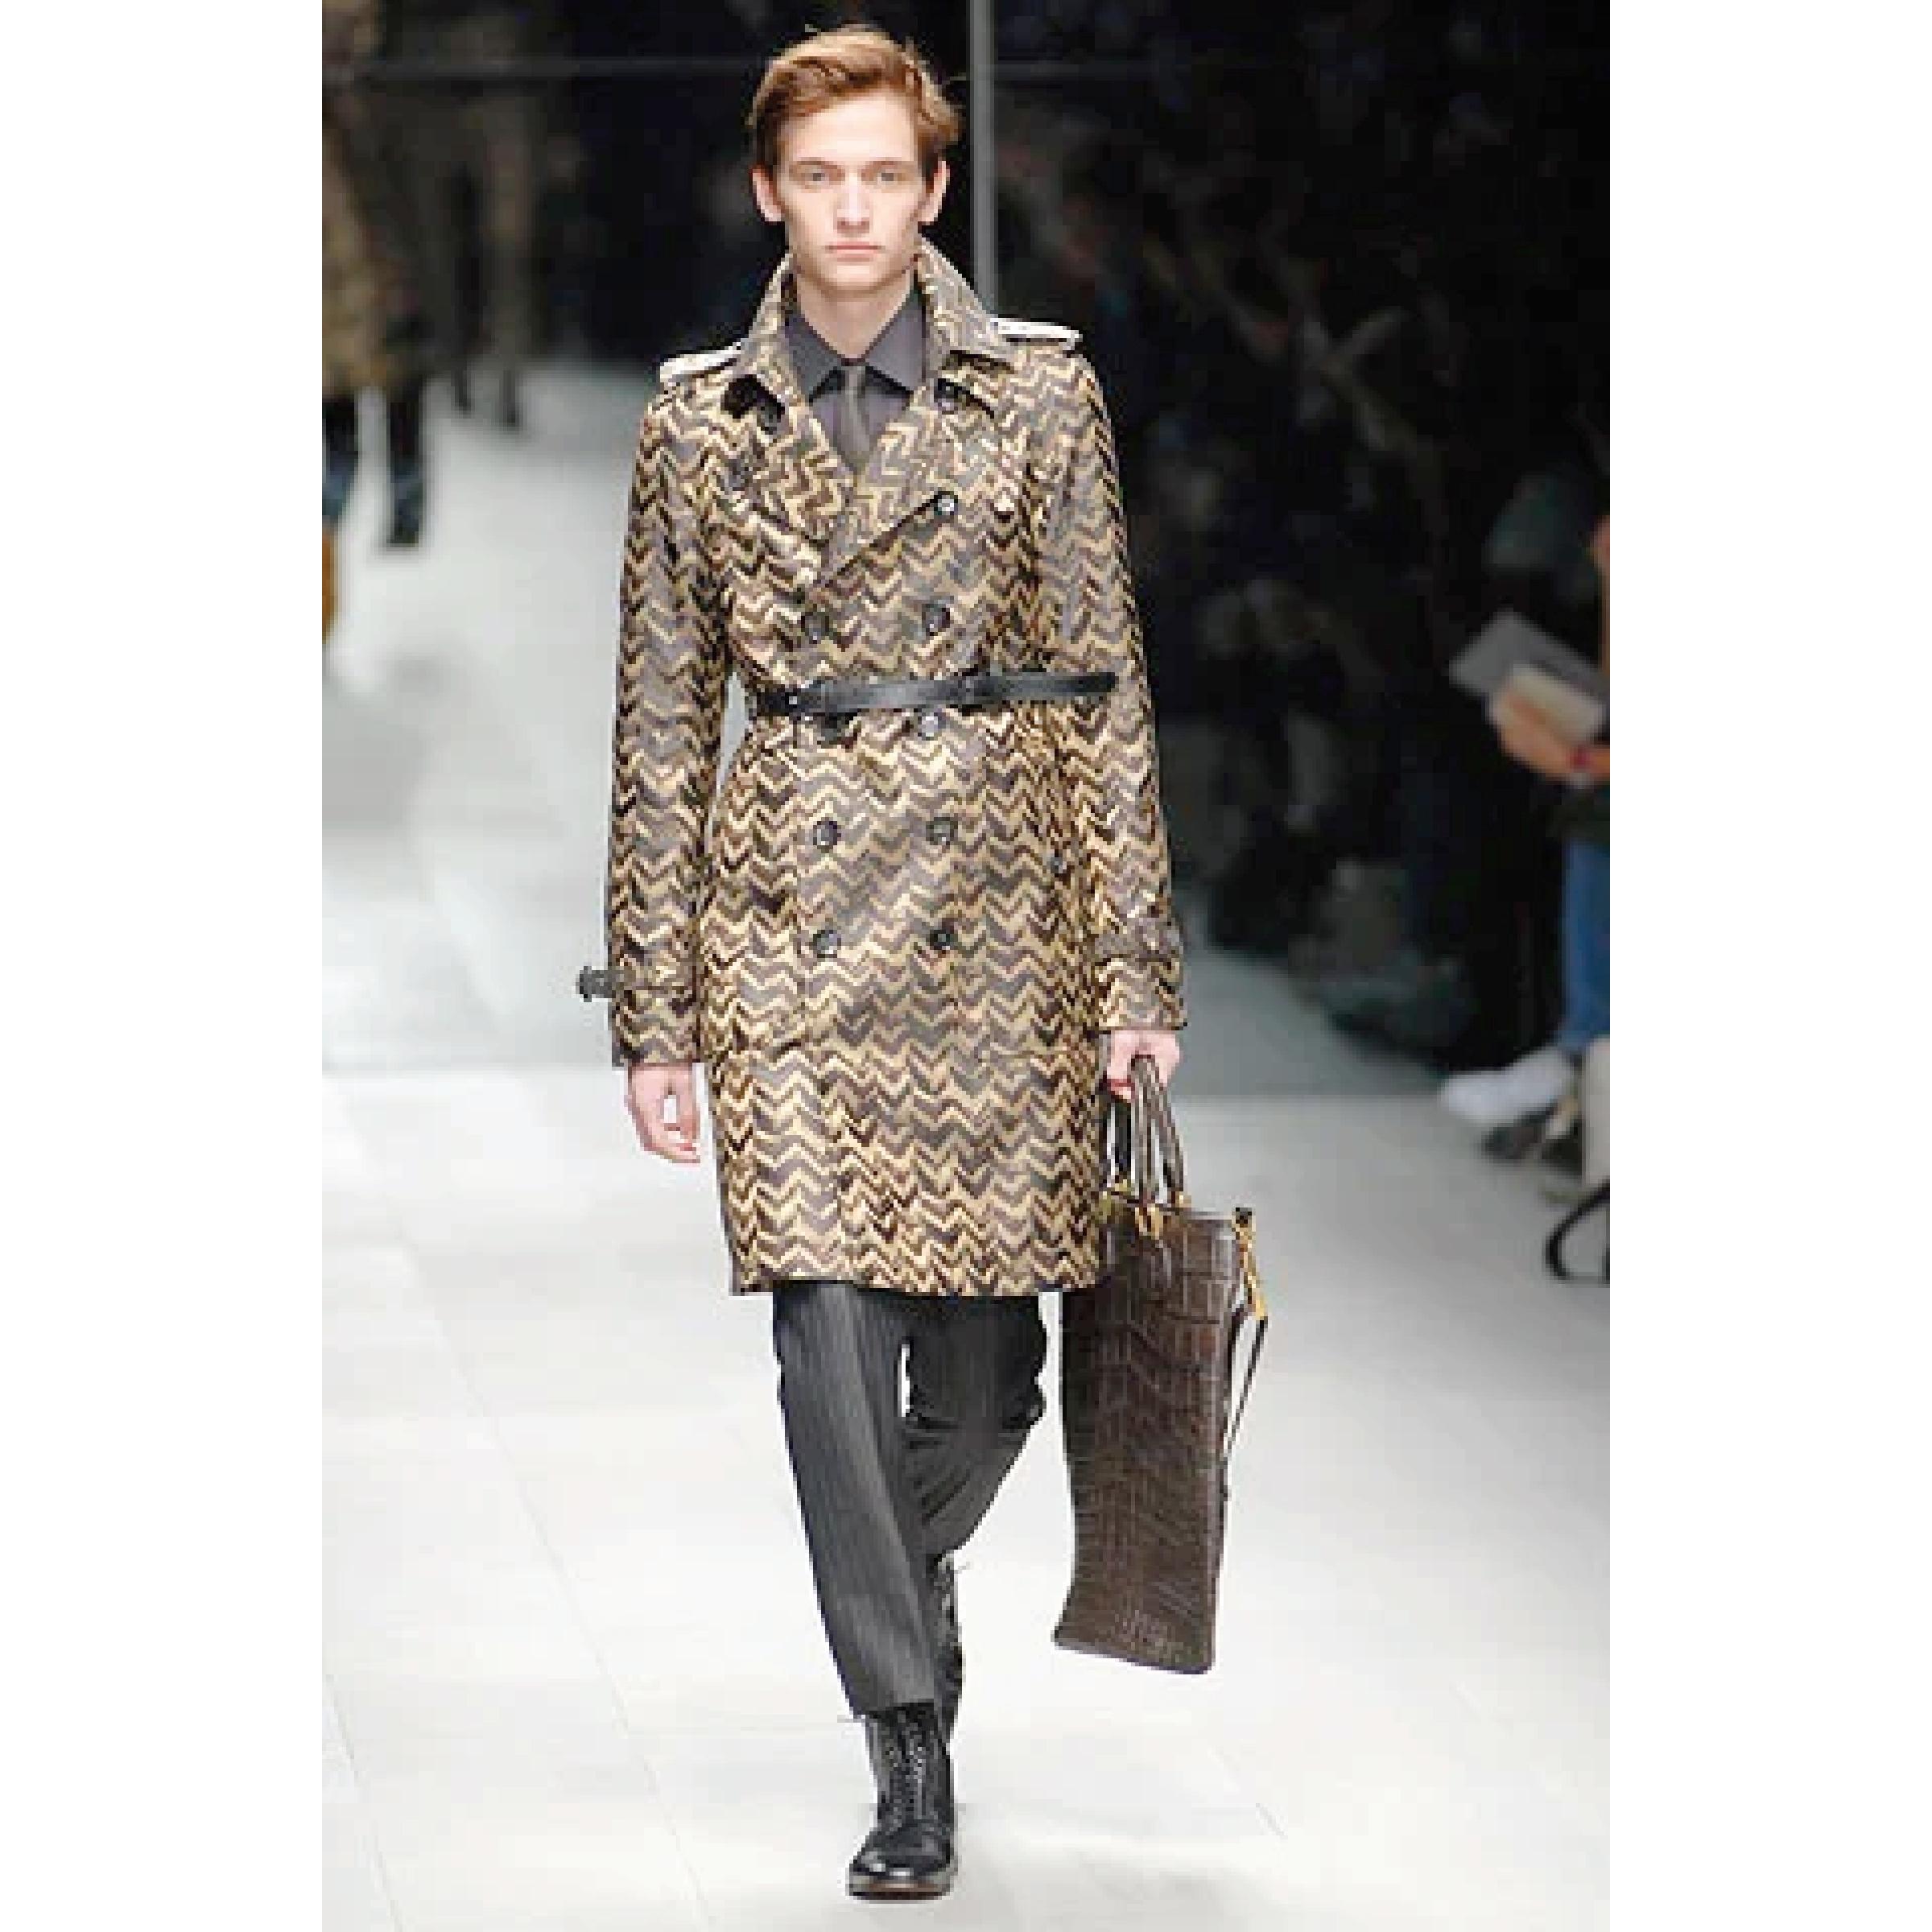 BURBERRY PRORSUM Fall 2007 trenchcoat comes in a metallic gold & brown silk with a black quilted liner featuring a belted style, epaulettes, flap pockets, belted sleeve details, back vent, and a double breasted closure. Made in Italy.

Matching